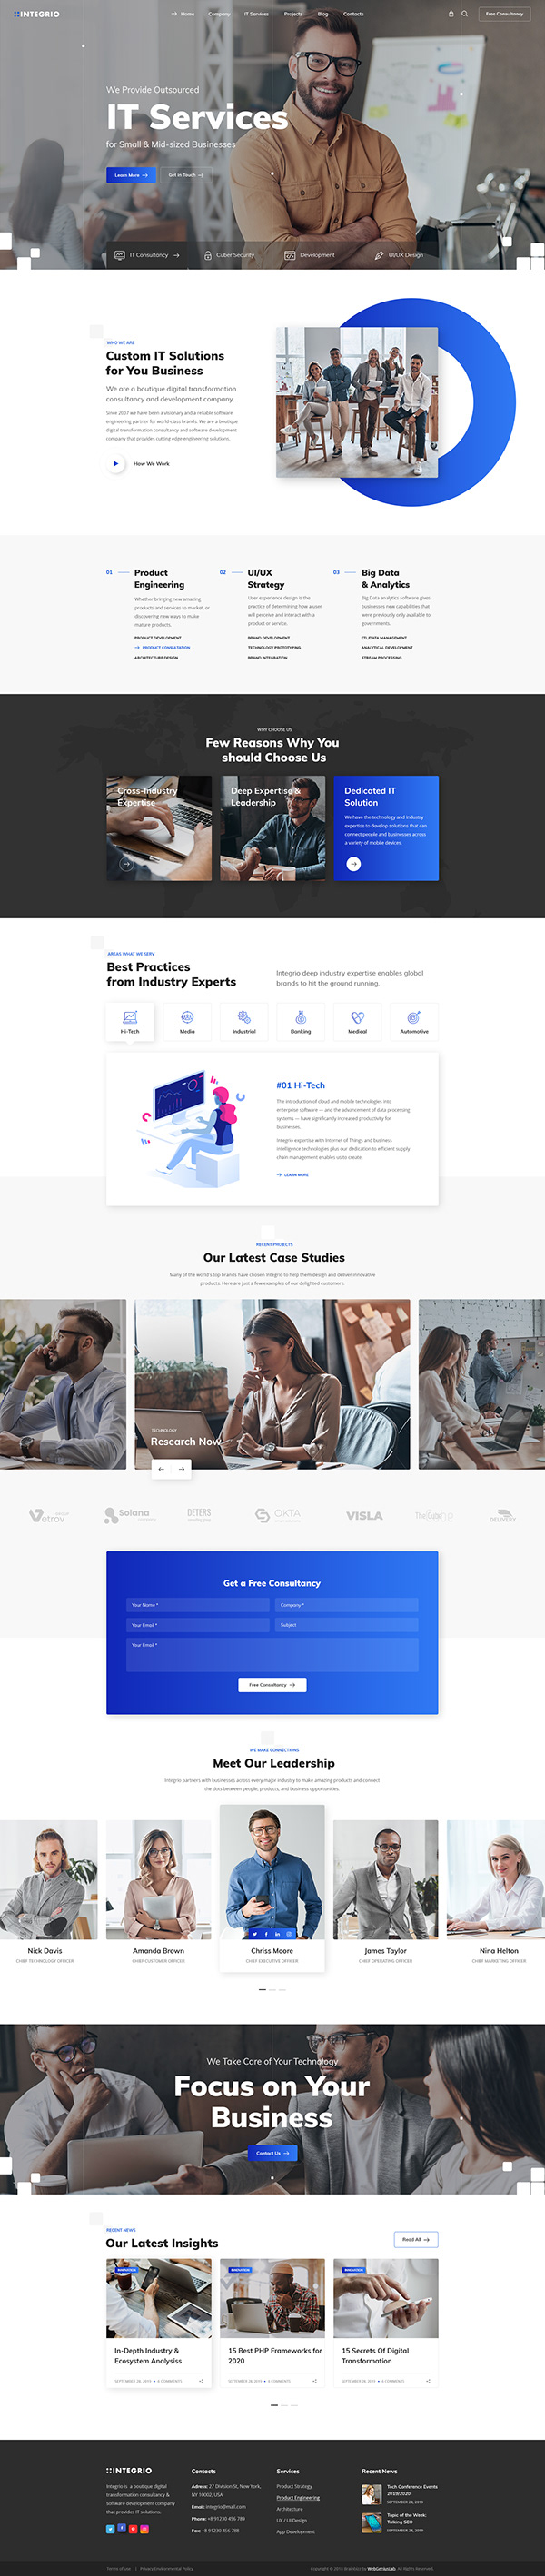 Integrio - IT Solutions and Services Company Theme